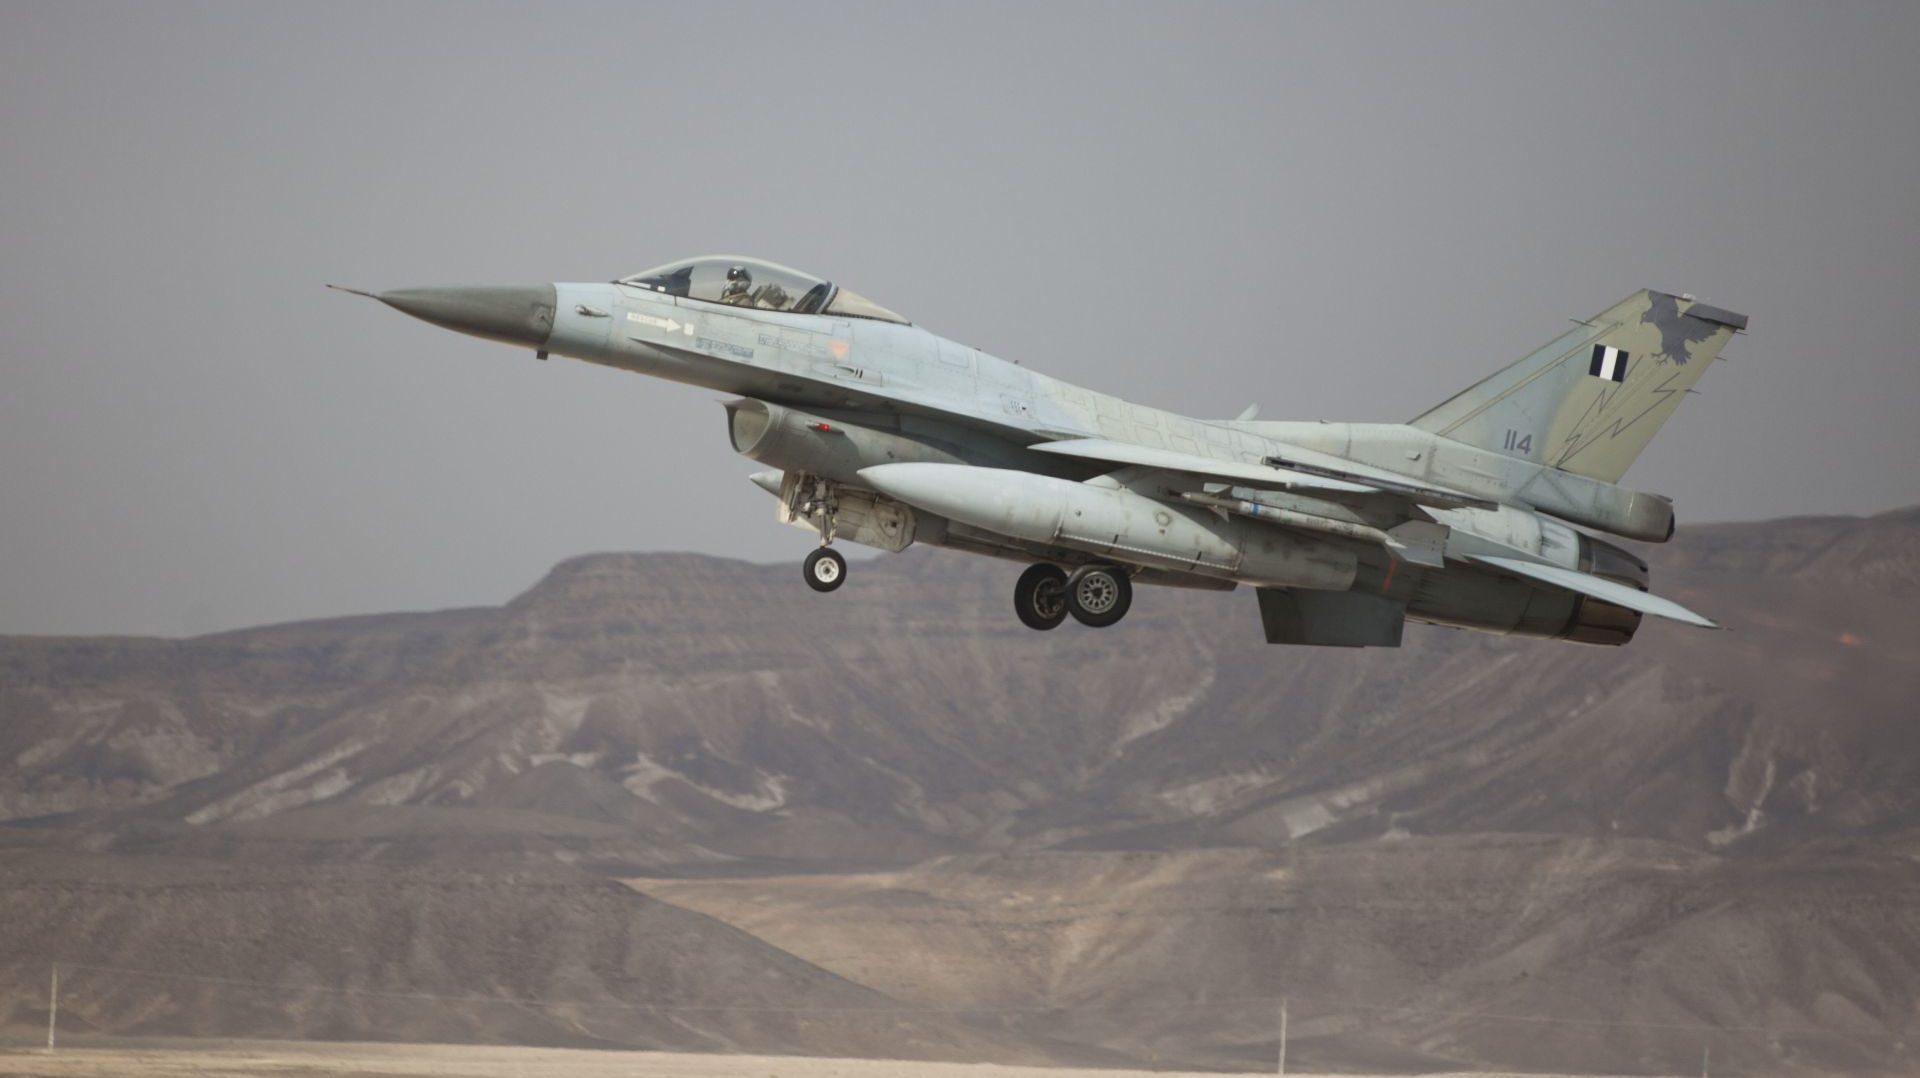 EILAT, ISRAEL - DECEMBER 09:  A Greek F-16 jet takes off on December 9, 2014 at the Ovda airbase in the Negev Desert near Eilat, southern Israel. Israel and Greece concluded a Joint Air Forces drill during the joint IDF-Hellenic Air Force drill week. On Sunday, official Syrian media reported that Israeli jets had bombed targets near Damascus International Airport and in the town of Dimas, north of Damascus and near the border with Lebanon.  (Photo by Lior Mizrahi/Getty Images)